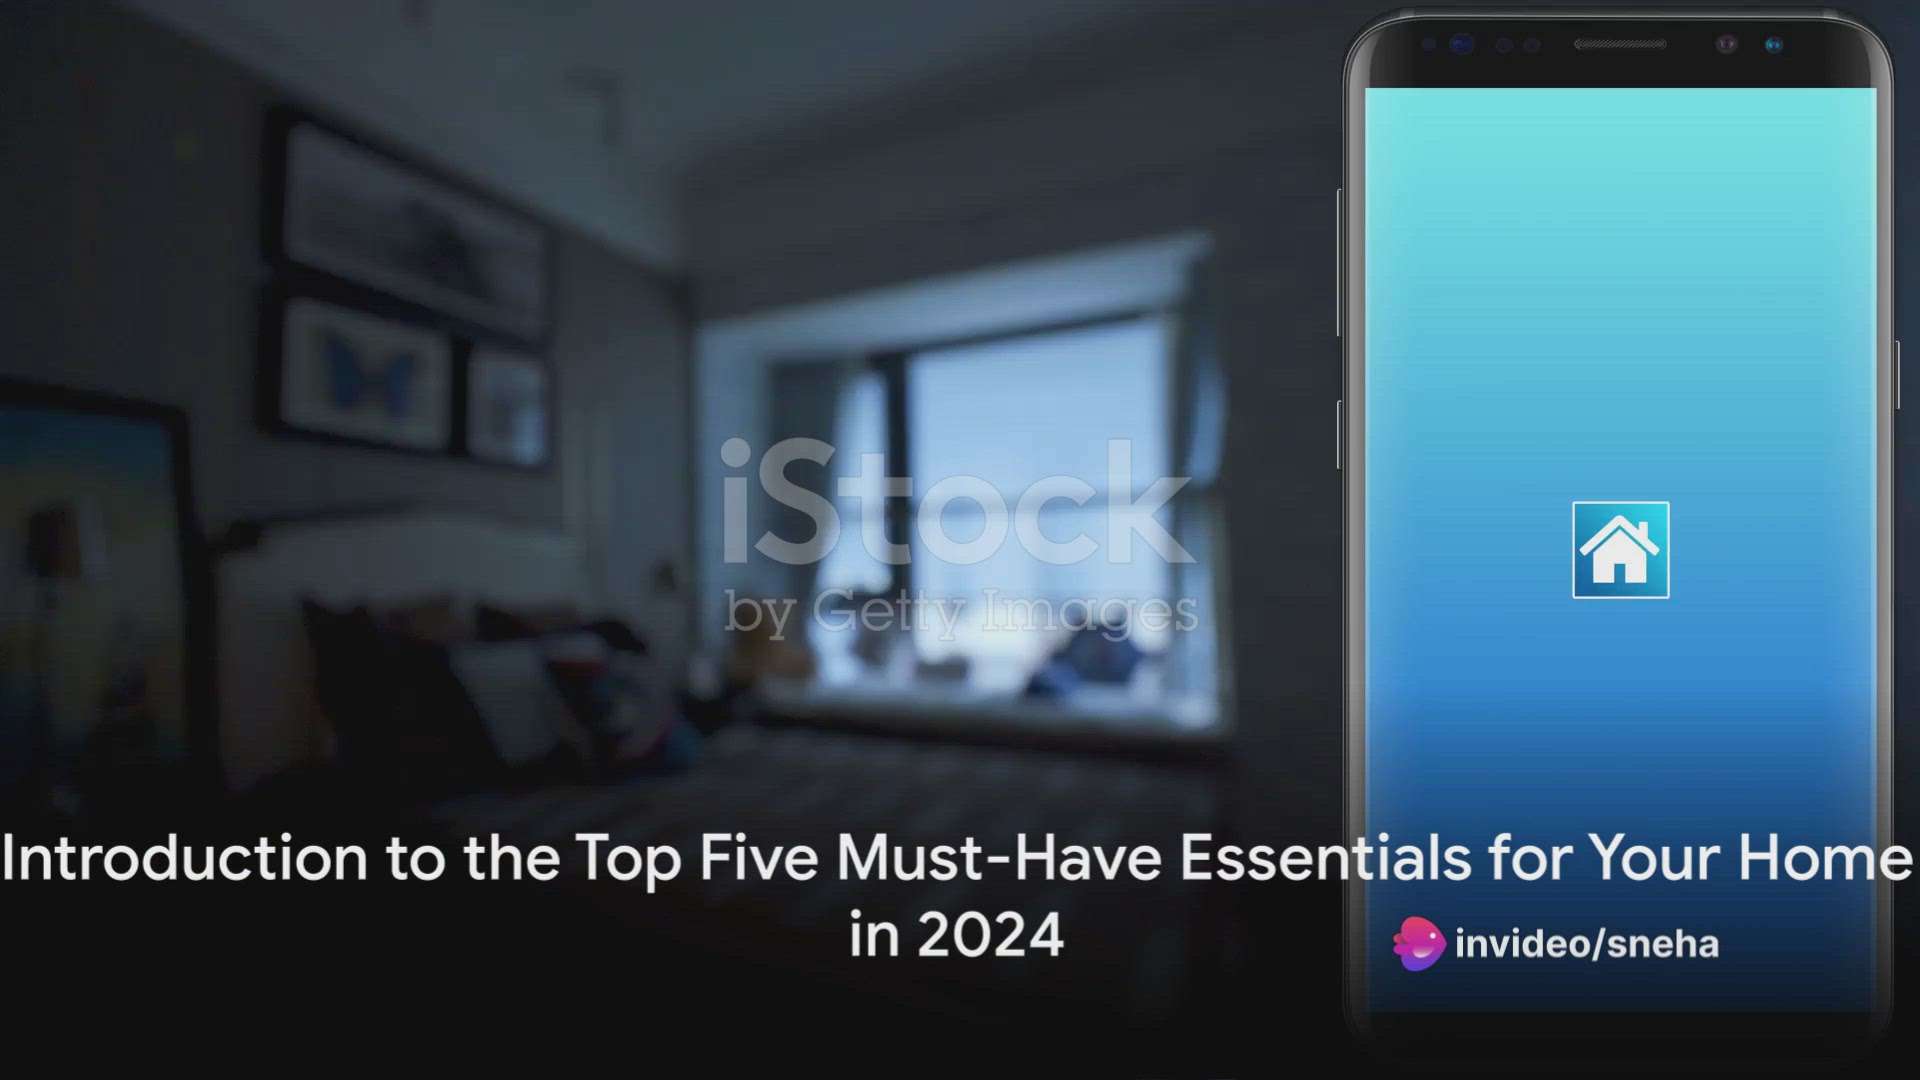 five must have essentials for your home in 2024 #creatorsofkolo #musthave #home #kitchenideas #modernhomes #ideas #essentials #smartlights  #smarthometechnology  #smarthomeautomation  #smartkitchen  #sustainabledesign  #sustainableliving  #ergonomicstudysetup  #ergonomicexecutivechair  #ergonomics  #Smart_touch #trendingnow  #trendingdesigns